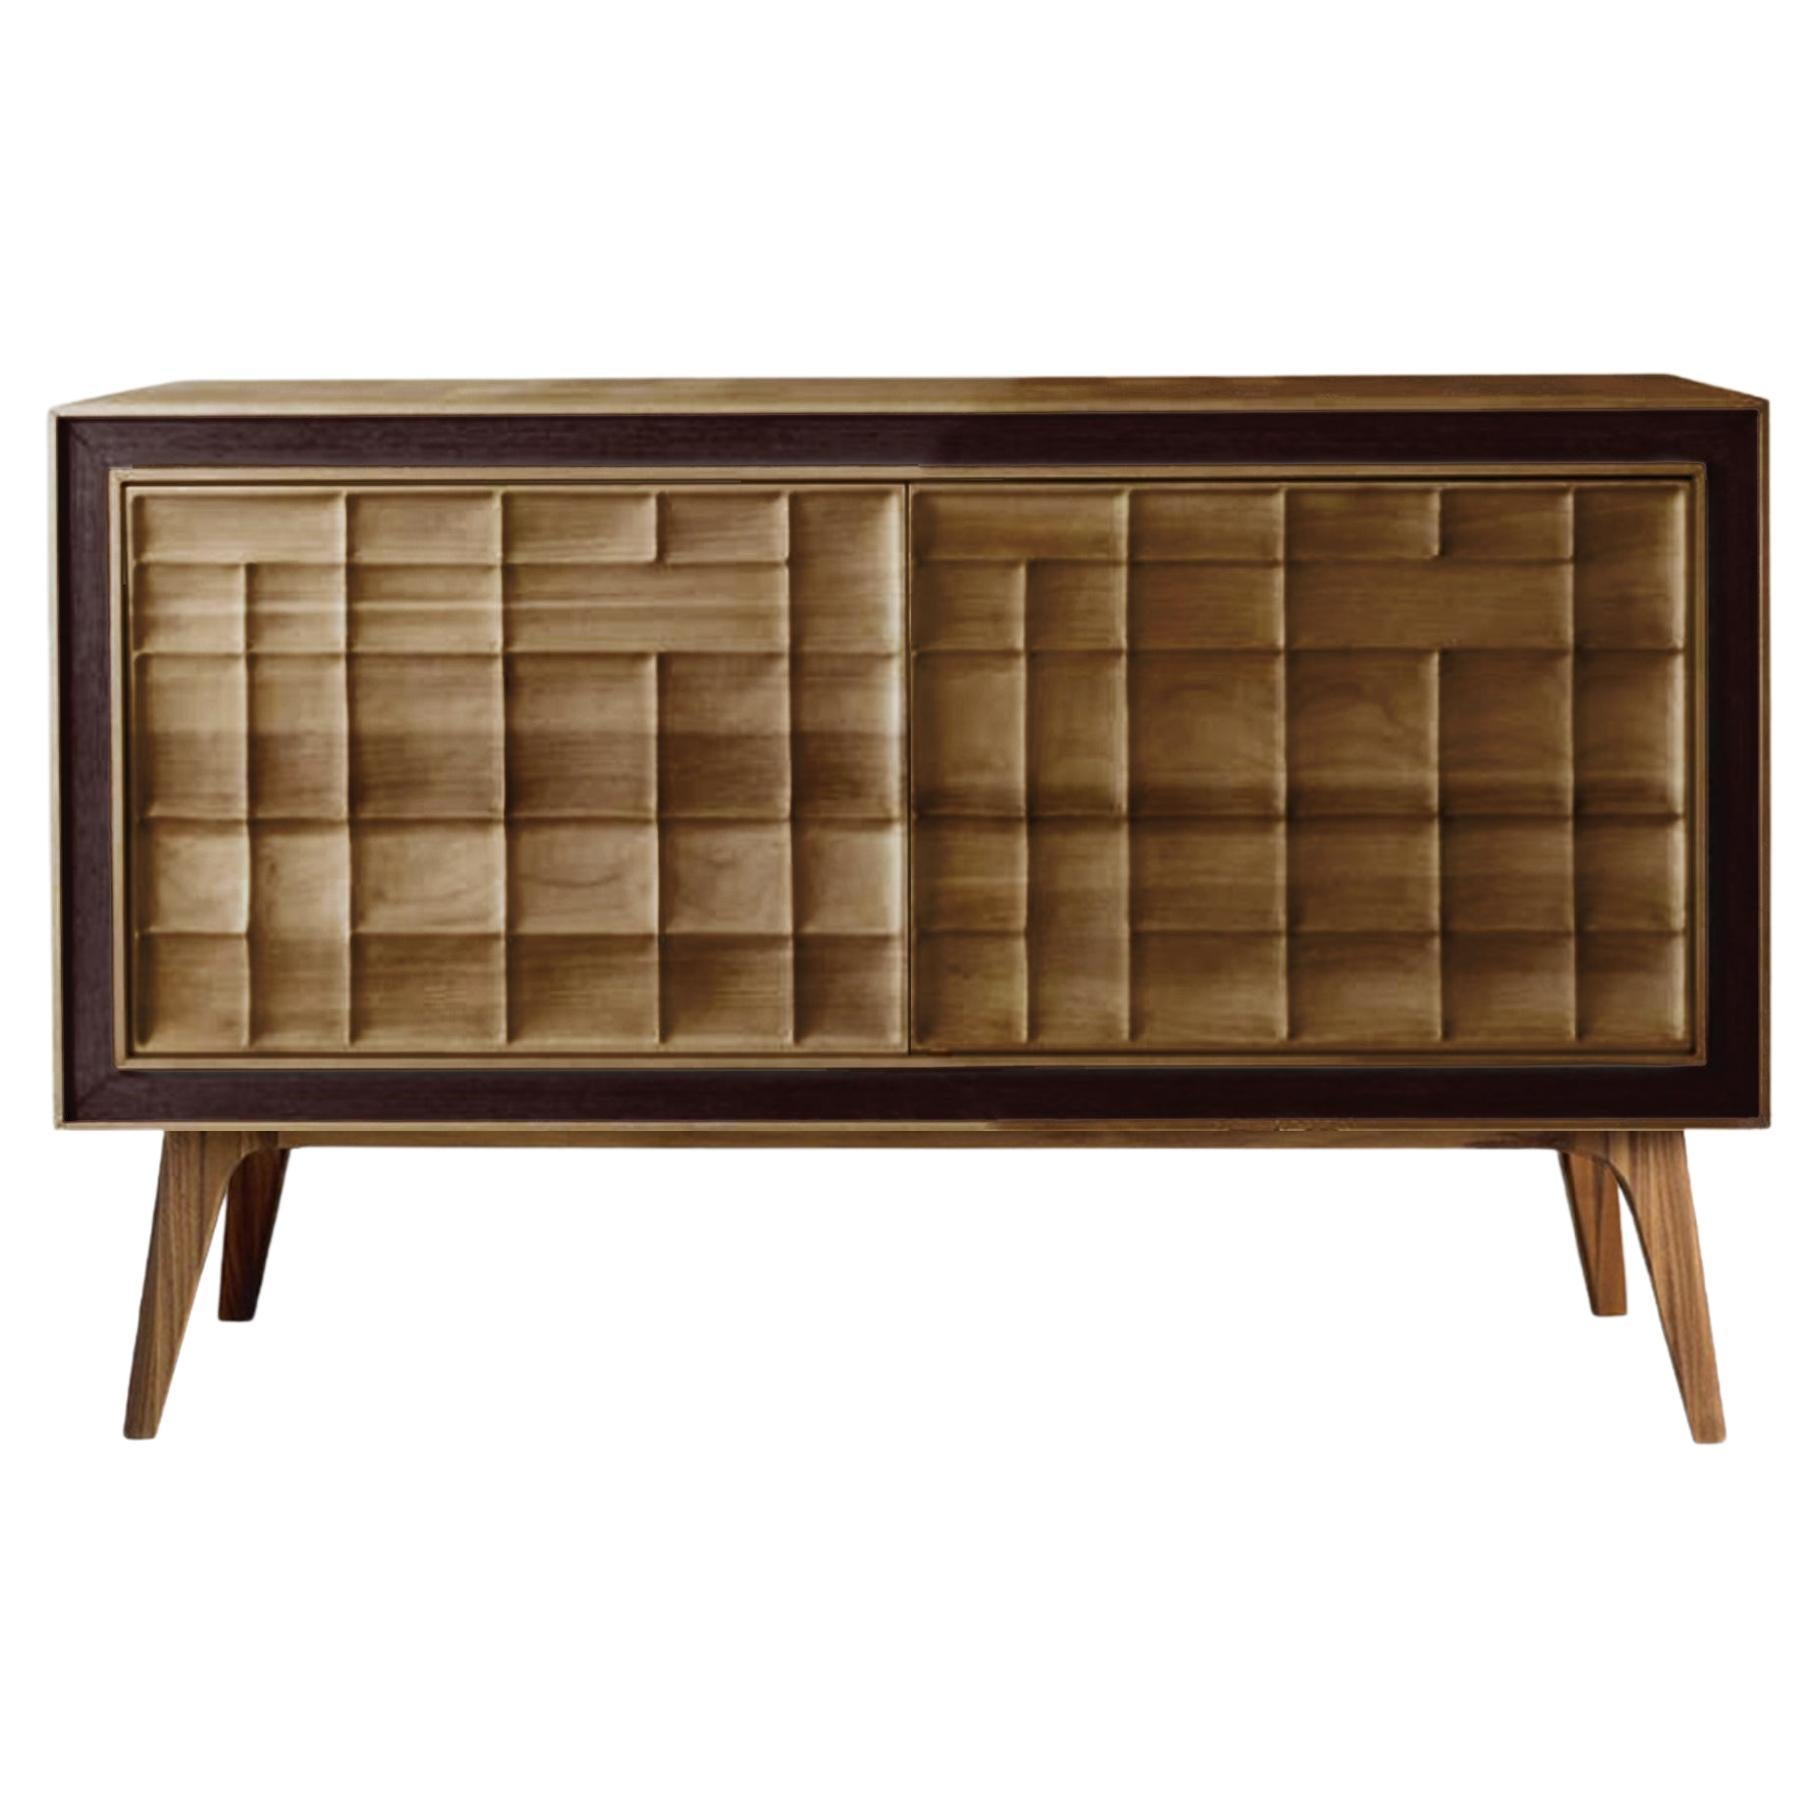 Quadra Scacco Solid Wood Sideboard, Walnut in Natural Finish, Contemporary